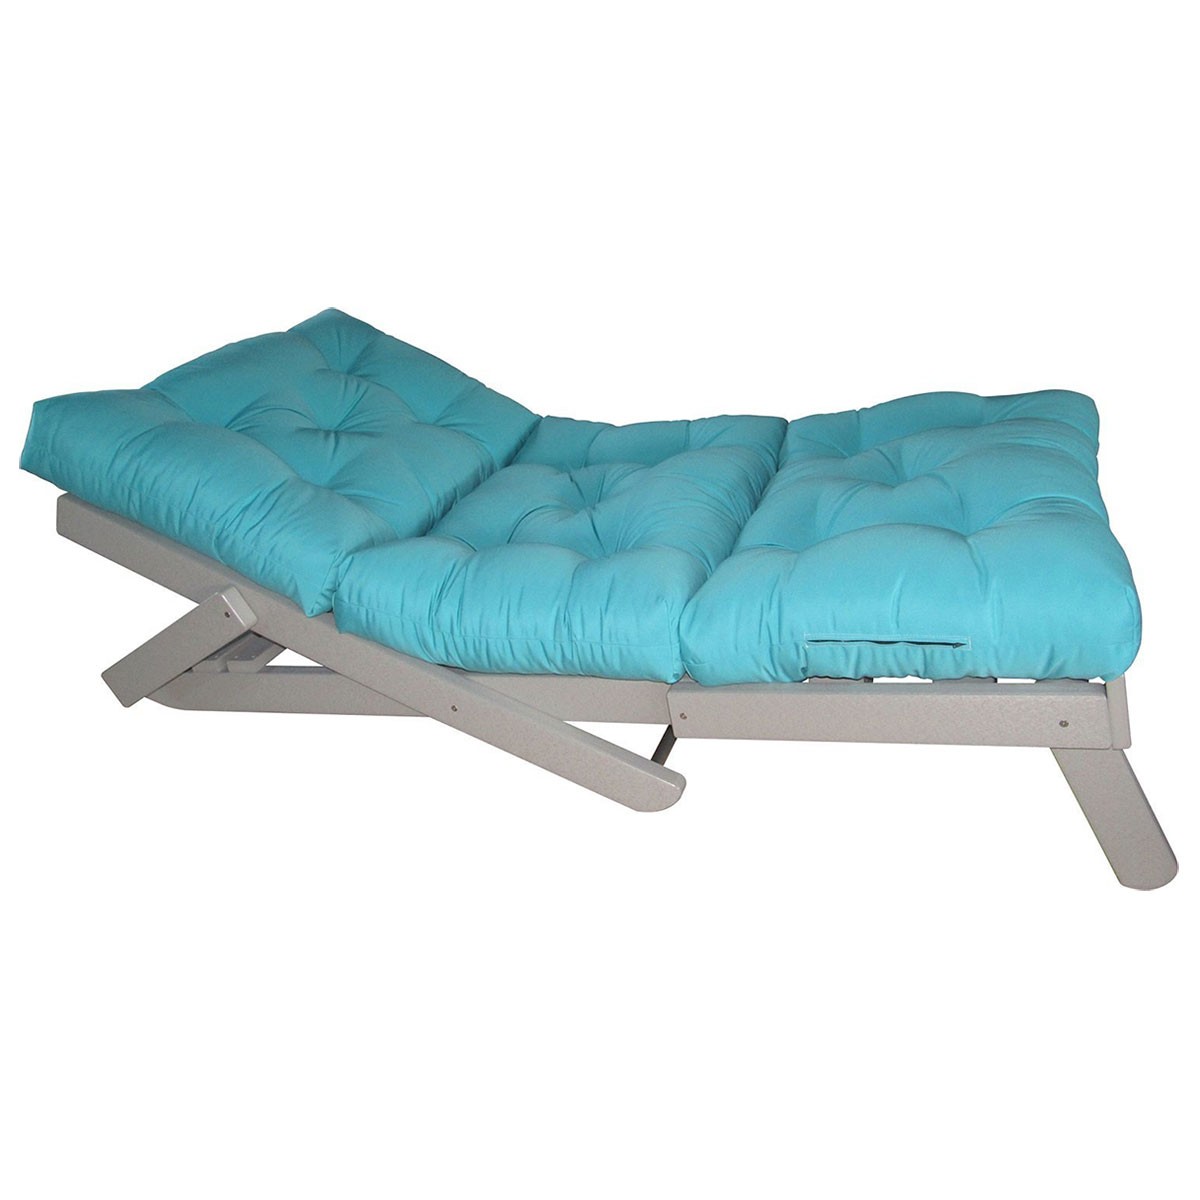 https://www.poly-lumber-furniture.com/media/catalog/product/a/m/amish-poly-siesta-folding-daybed.jpg